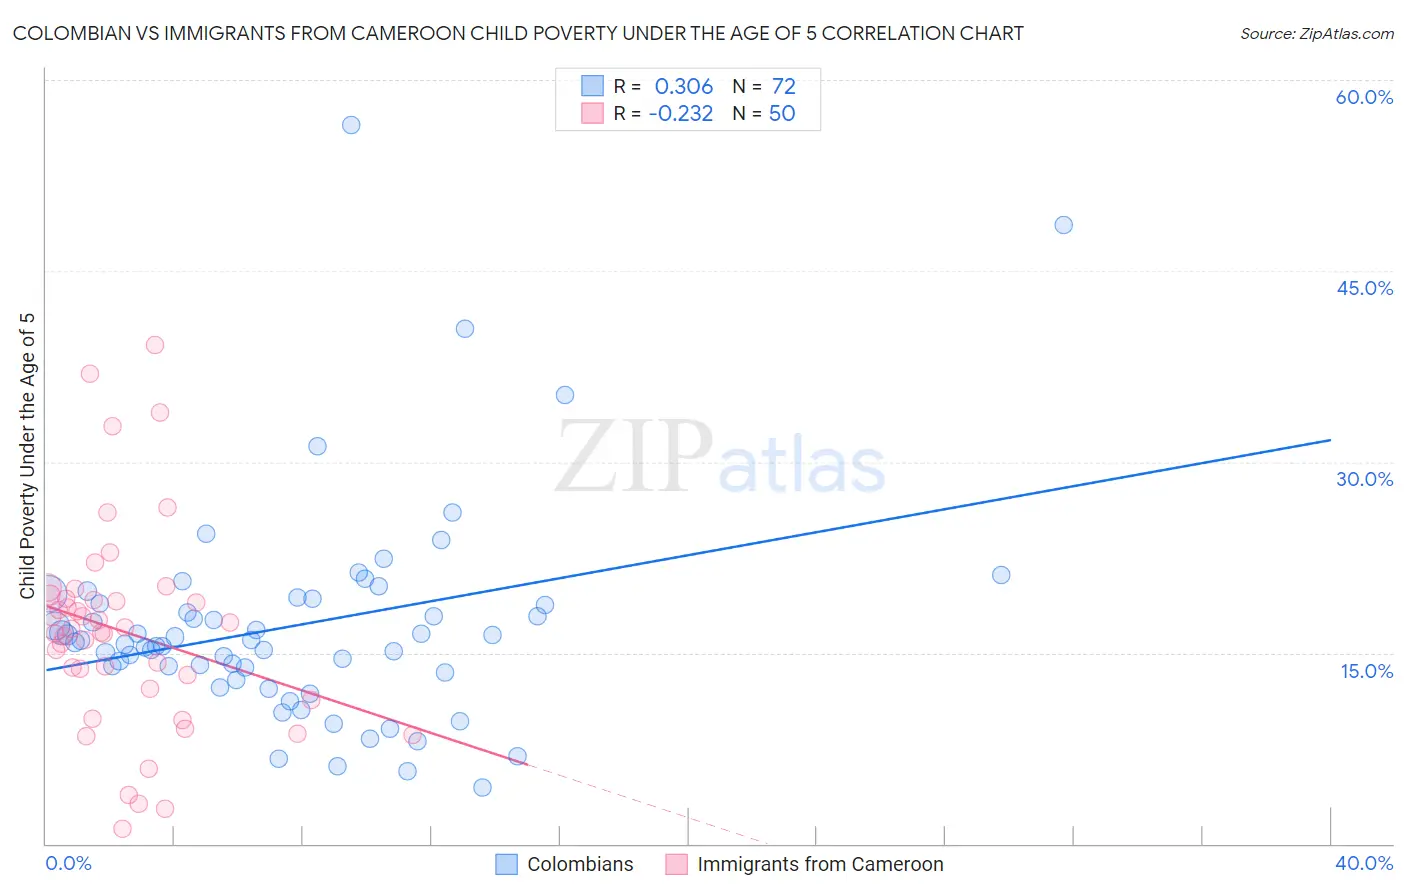 Colombian vs Immigrants from Cameroon Child Poverty Under the Age of 5